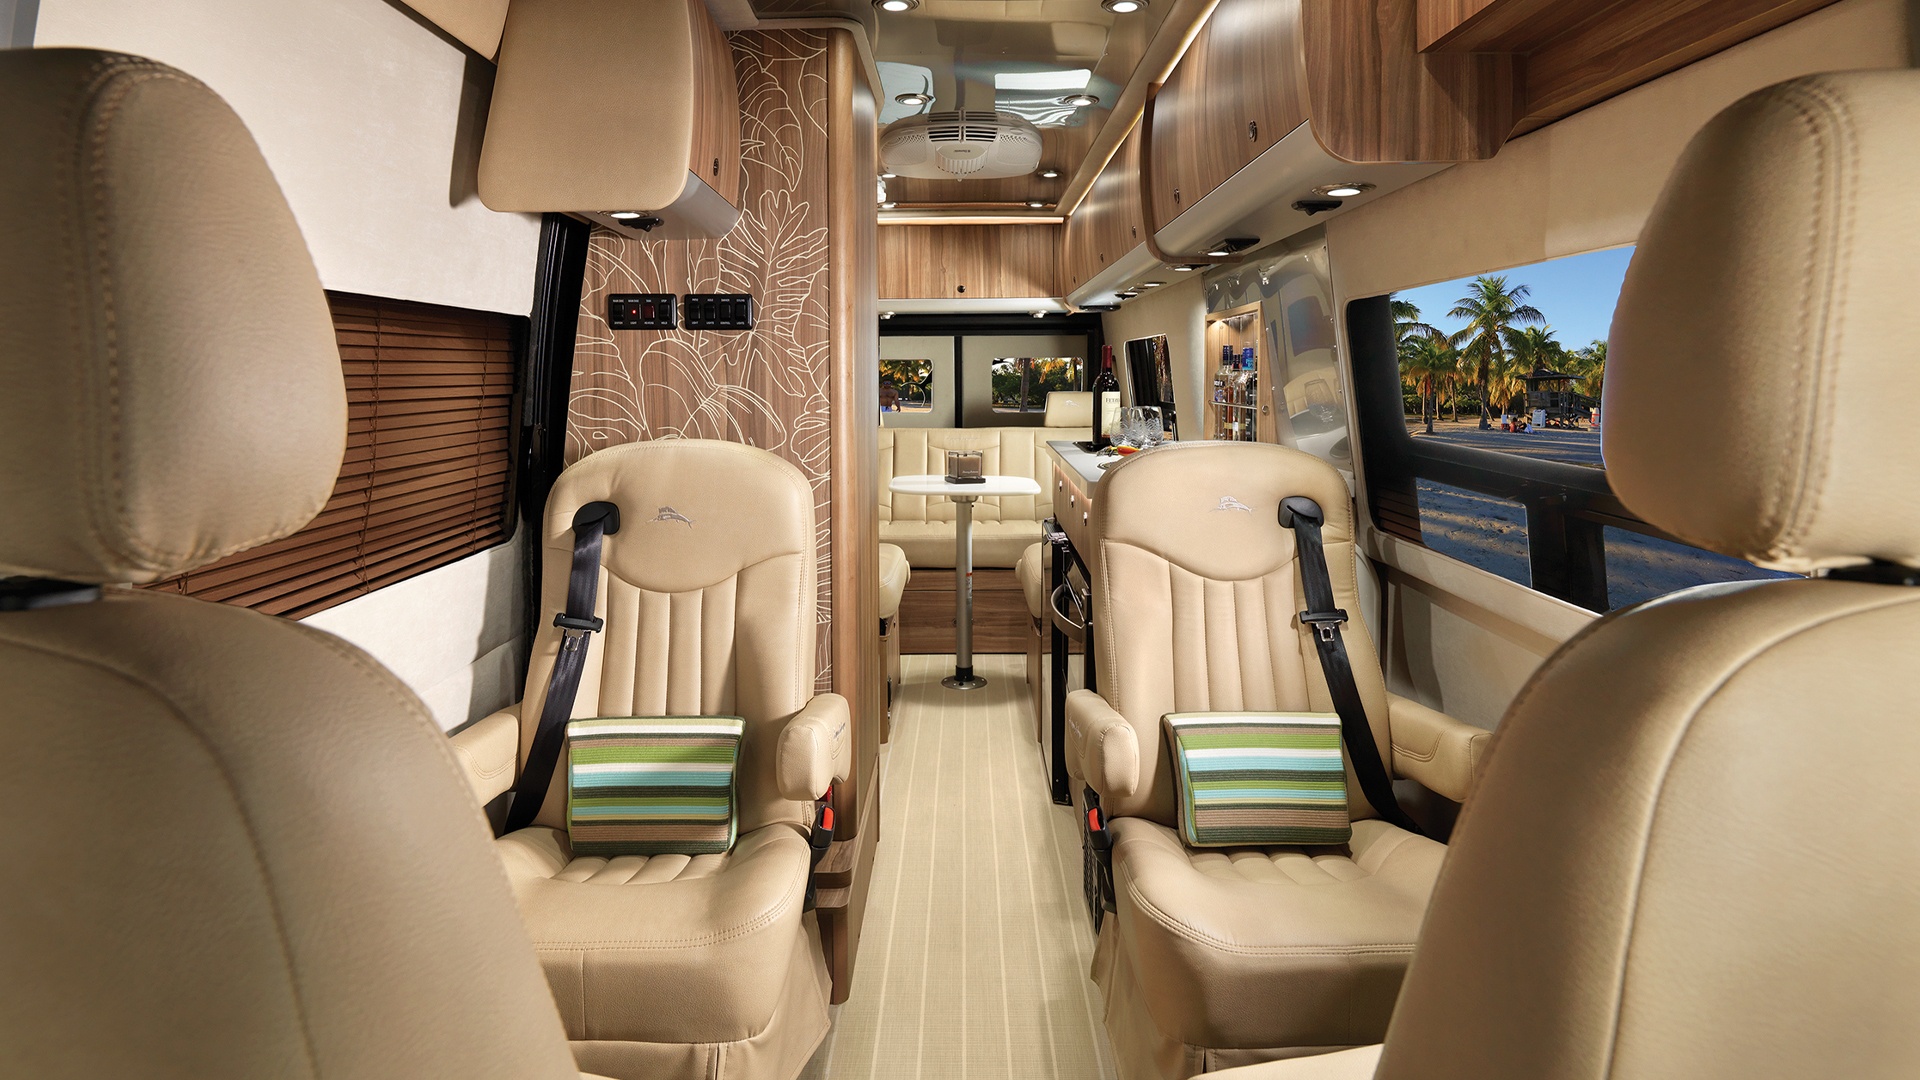 New Airstream Tommy Bahama Special Editions Airstream Of South Florida ...